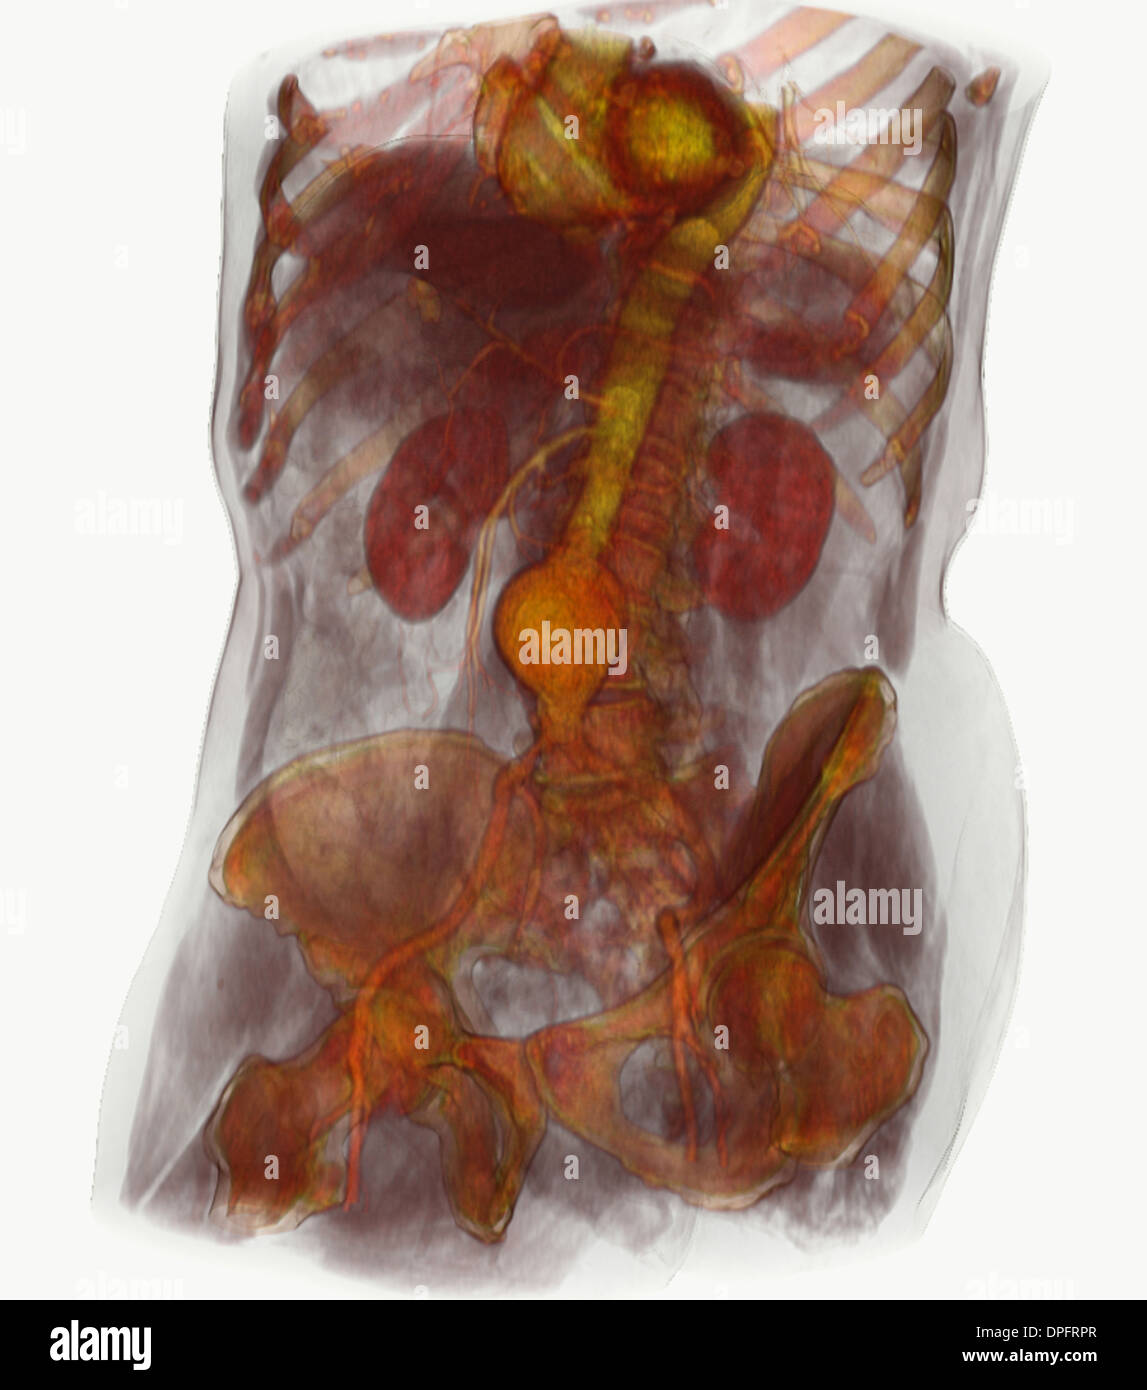 CT scan image showing an abdominal aortic aneurysm Stock Photo